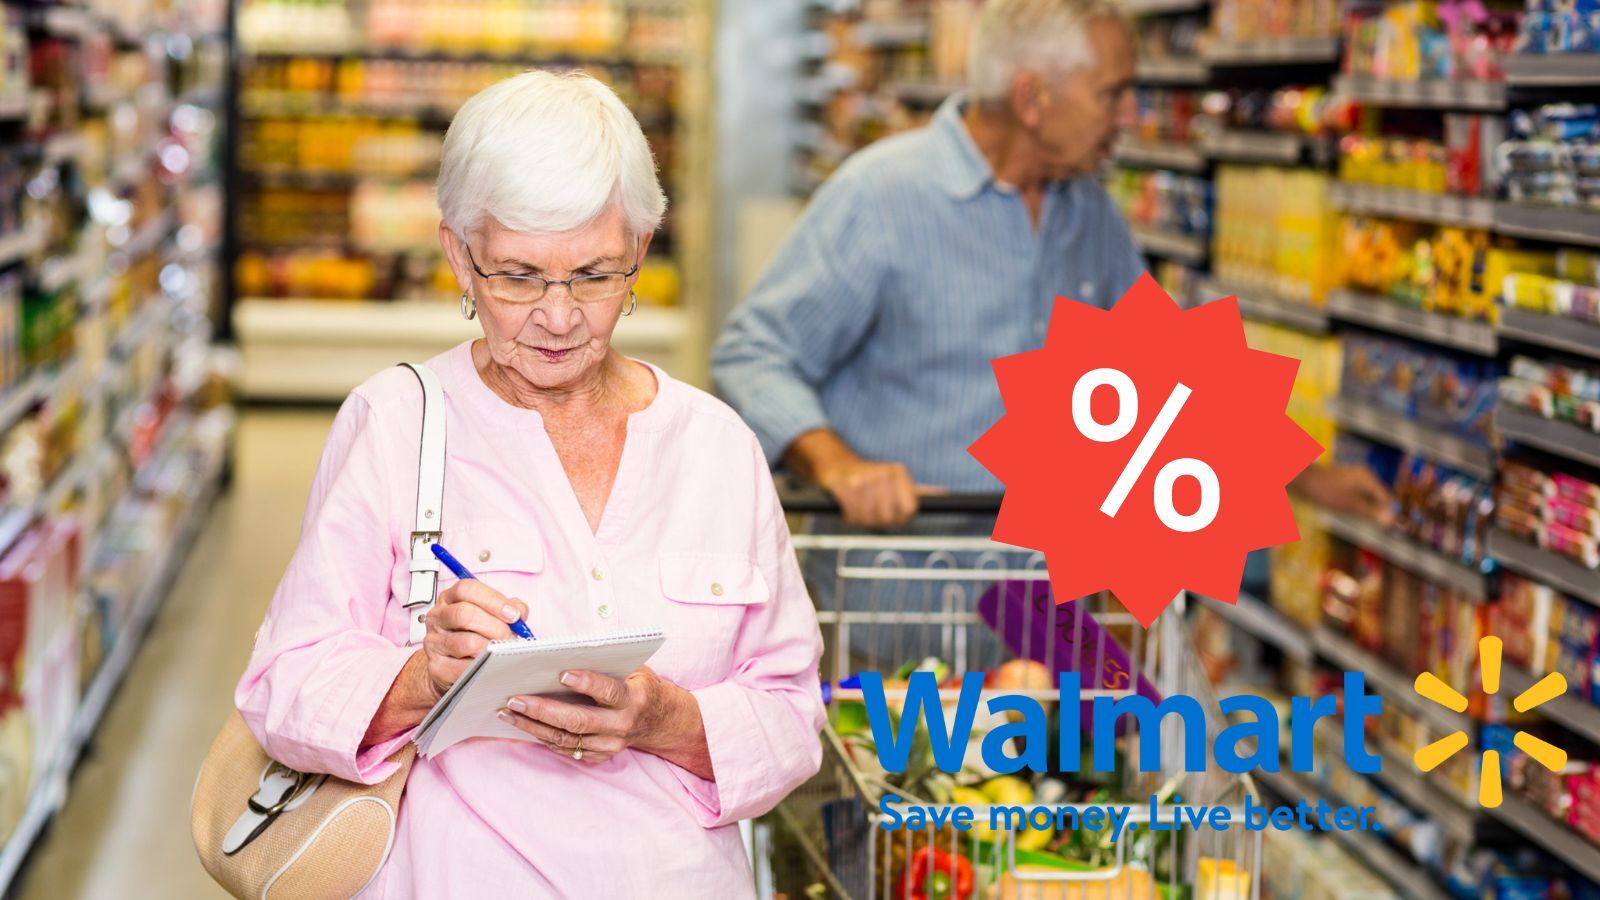 Walmart Senior Discount - No? There Are Other Alternatives!